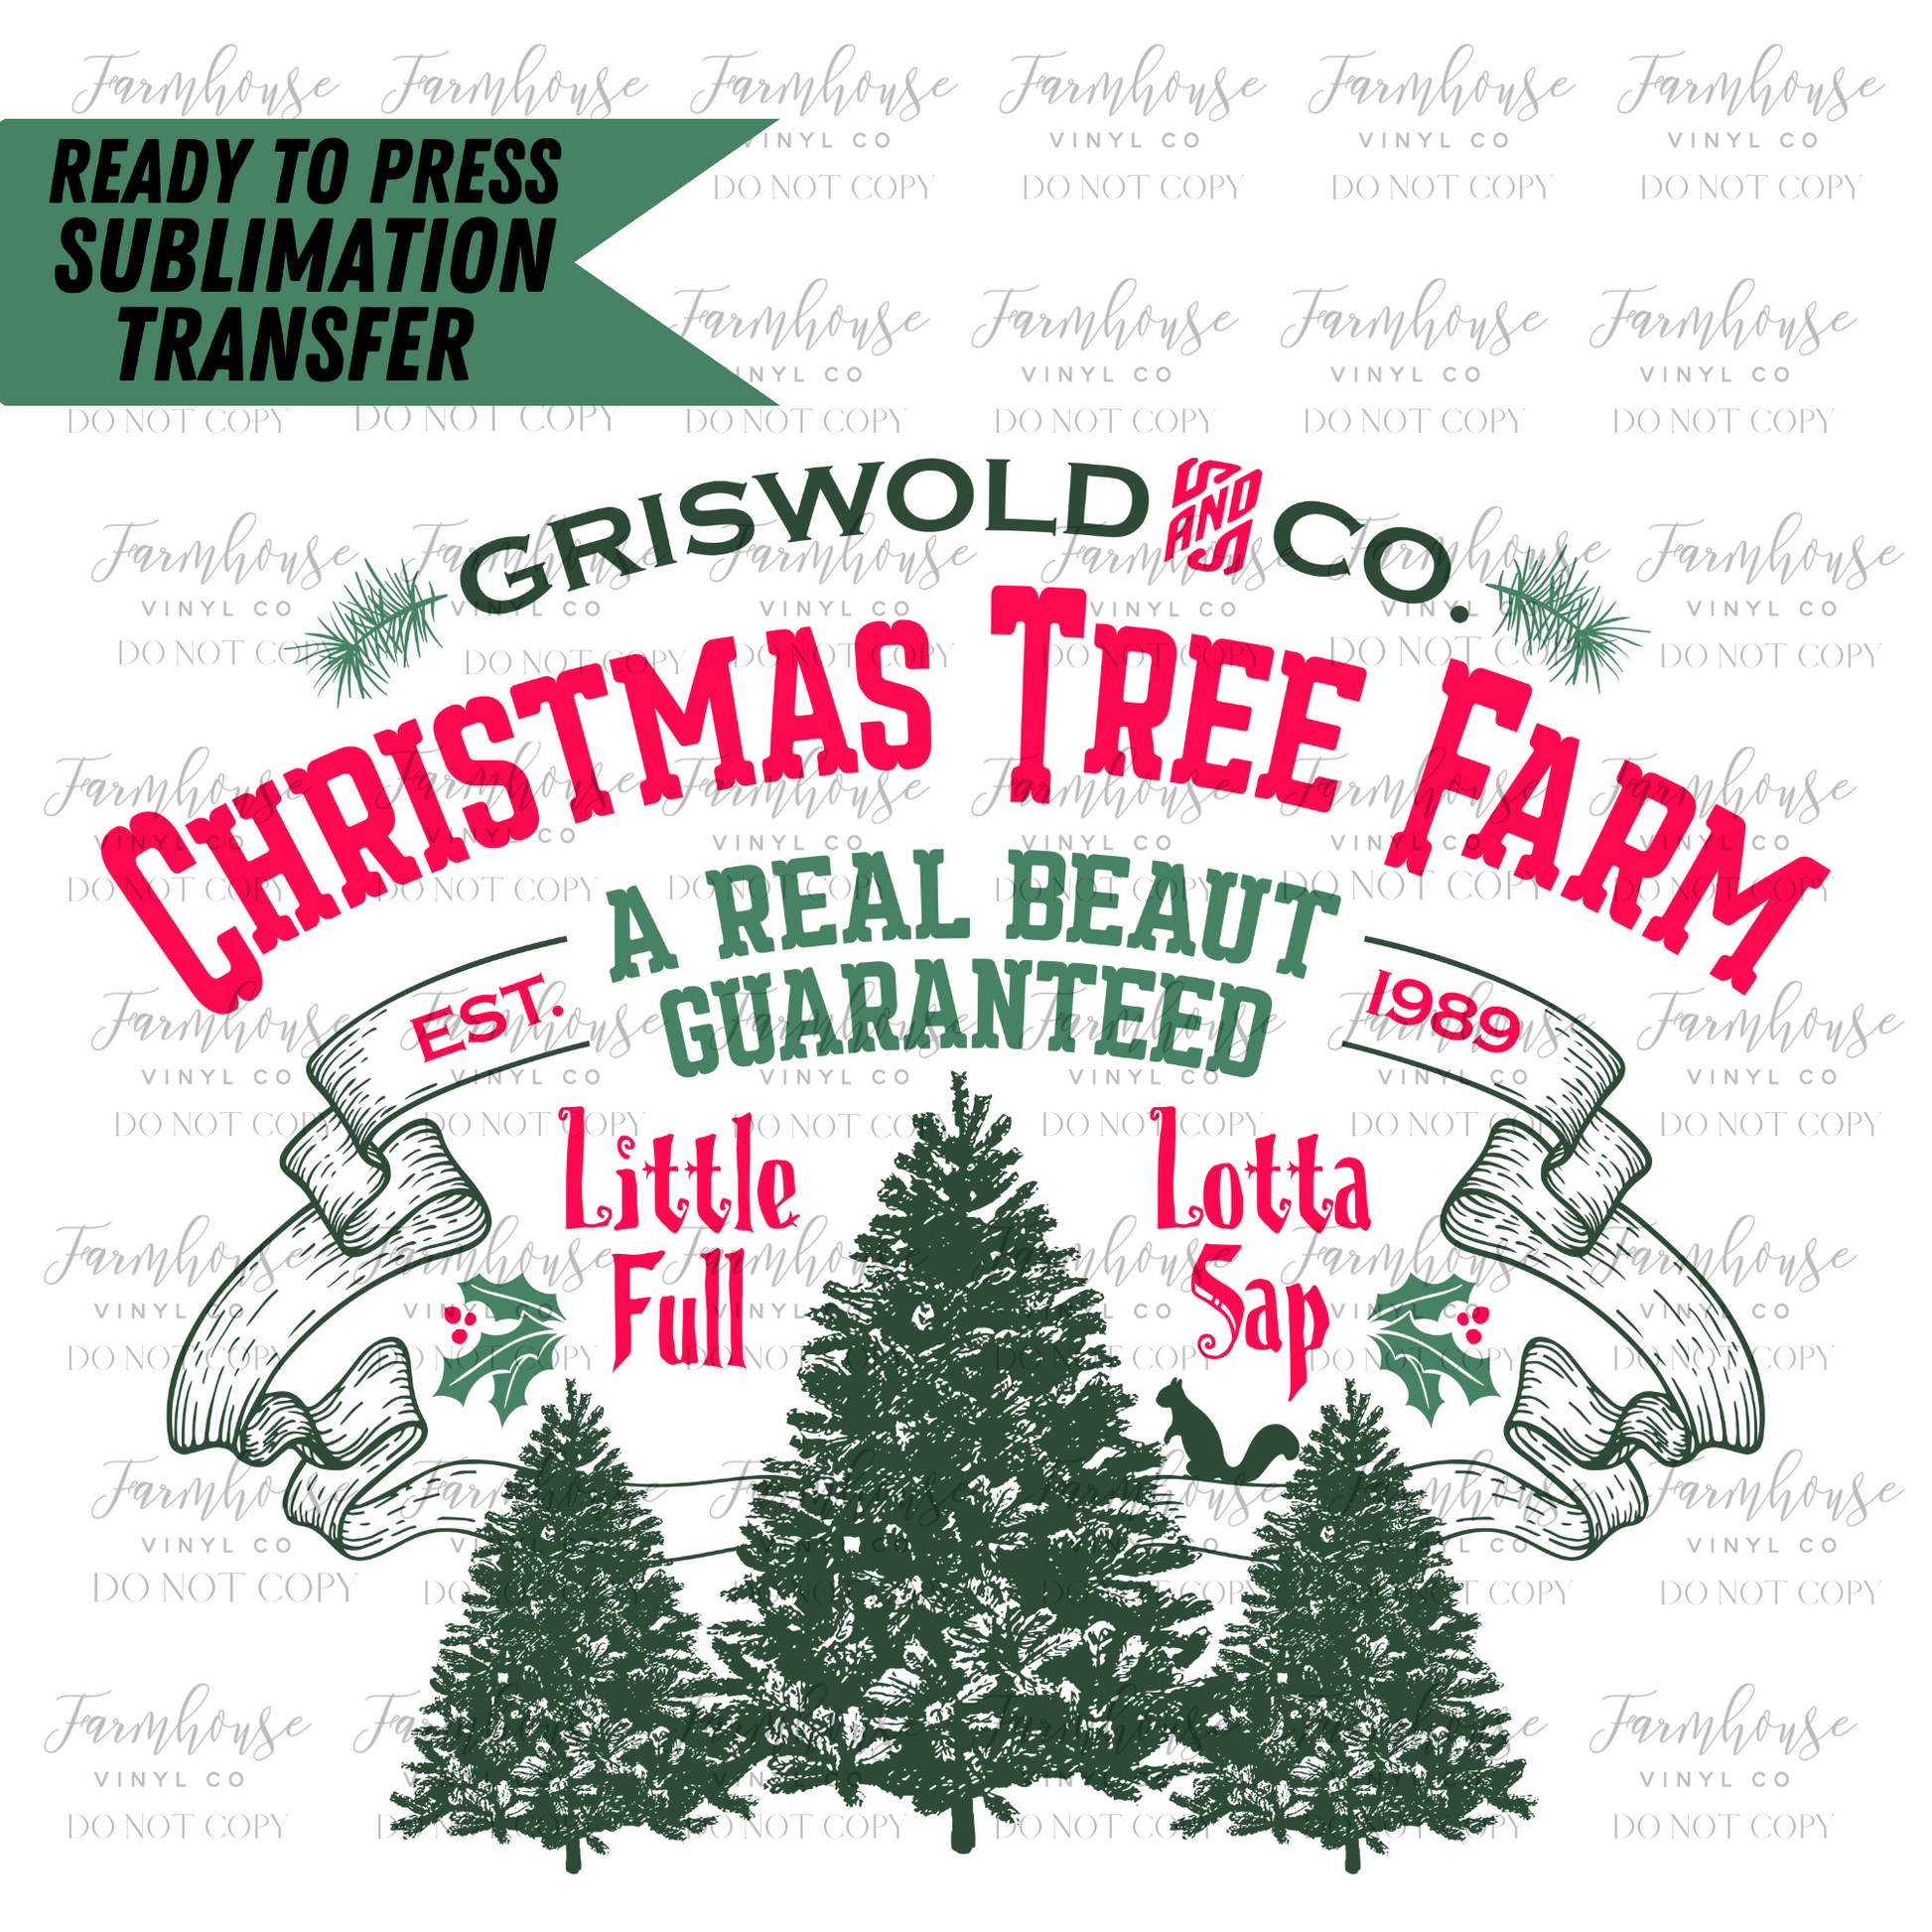 Griswold And Co Christmas Tree Farm Ready To Press Sublimation Transfer Design - Farmhouse Vinyl Co